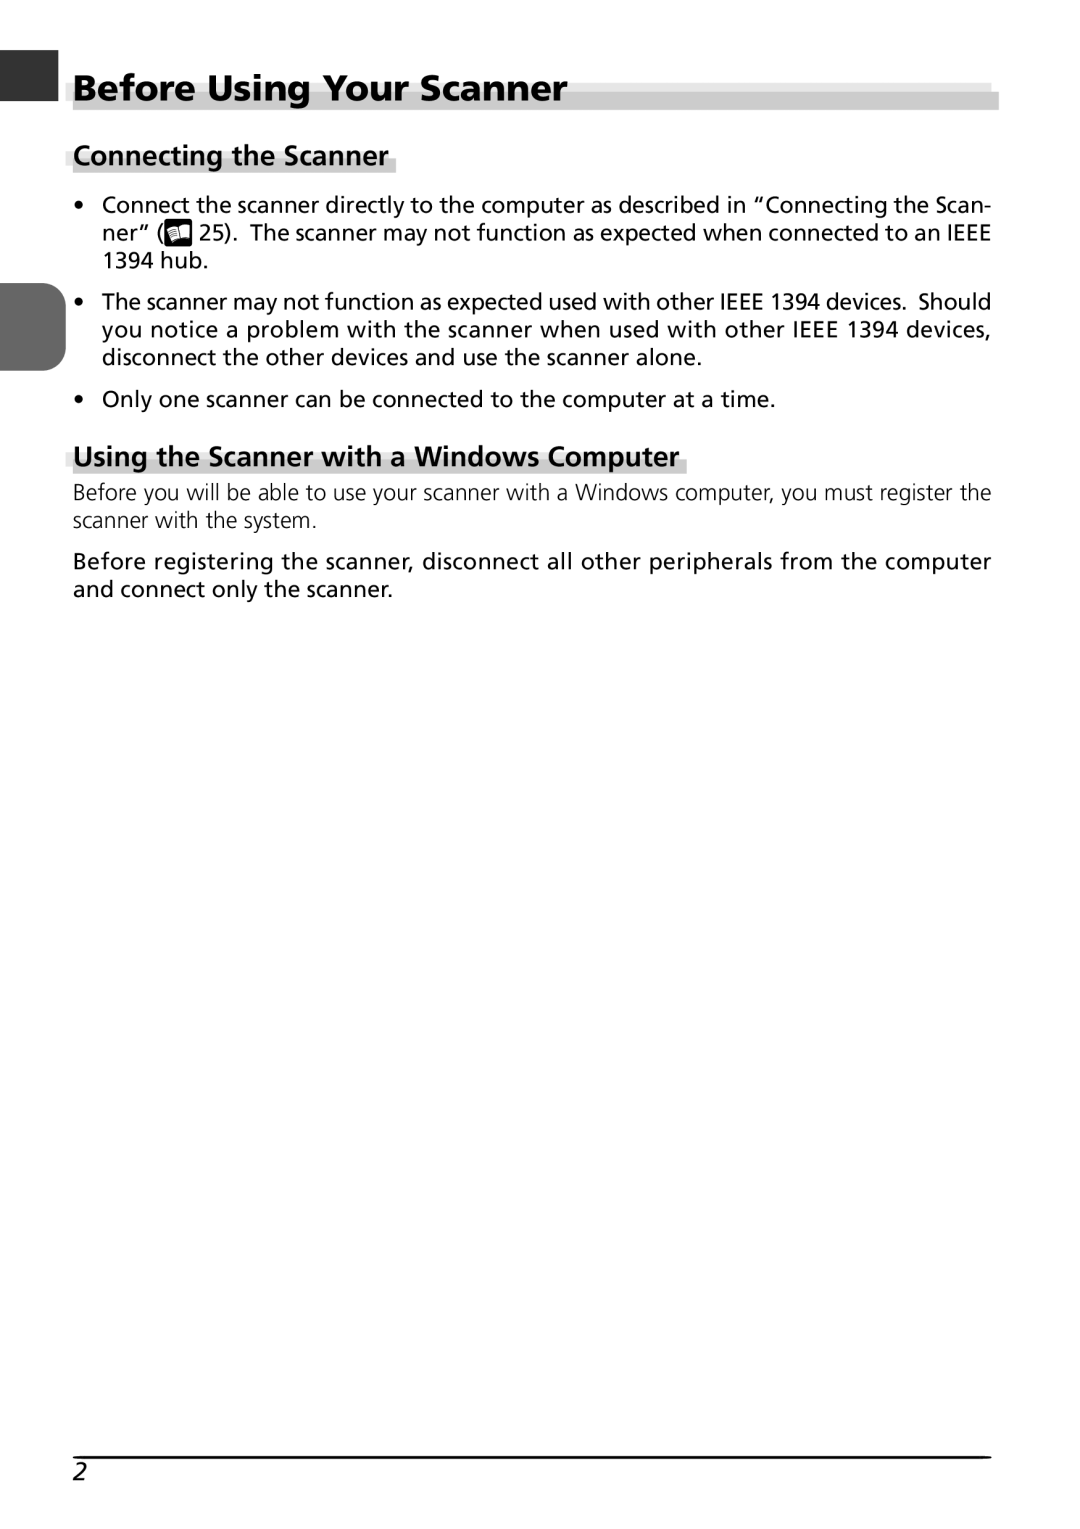 Nikon LS8000 user manual Before Using Your Scanner, Connecting the Scanner, Using the Scanner with a Windows Computer 